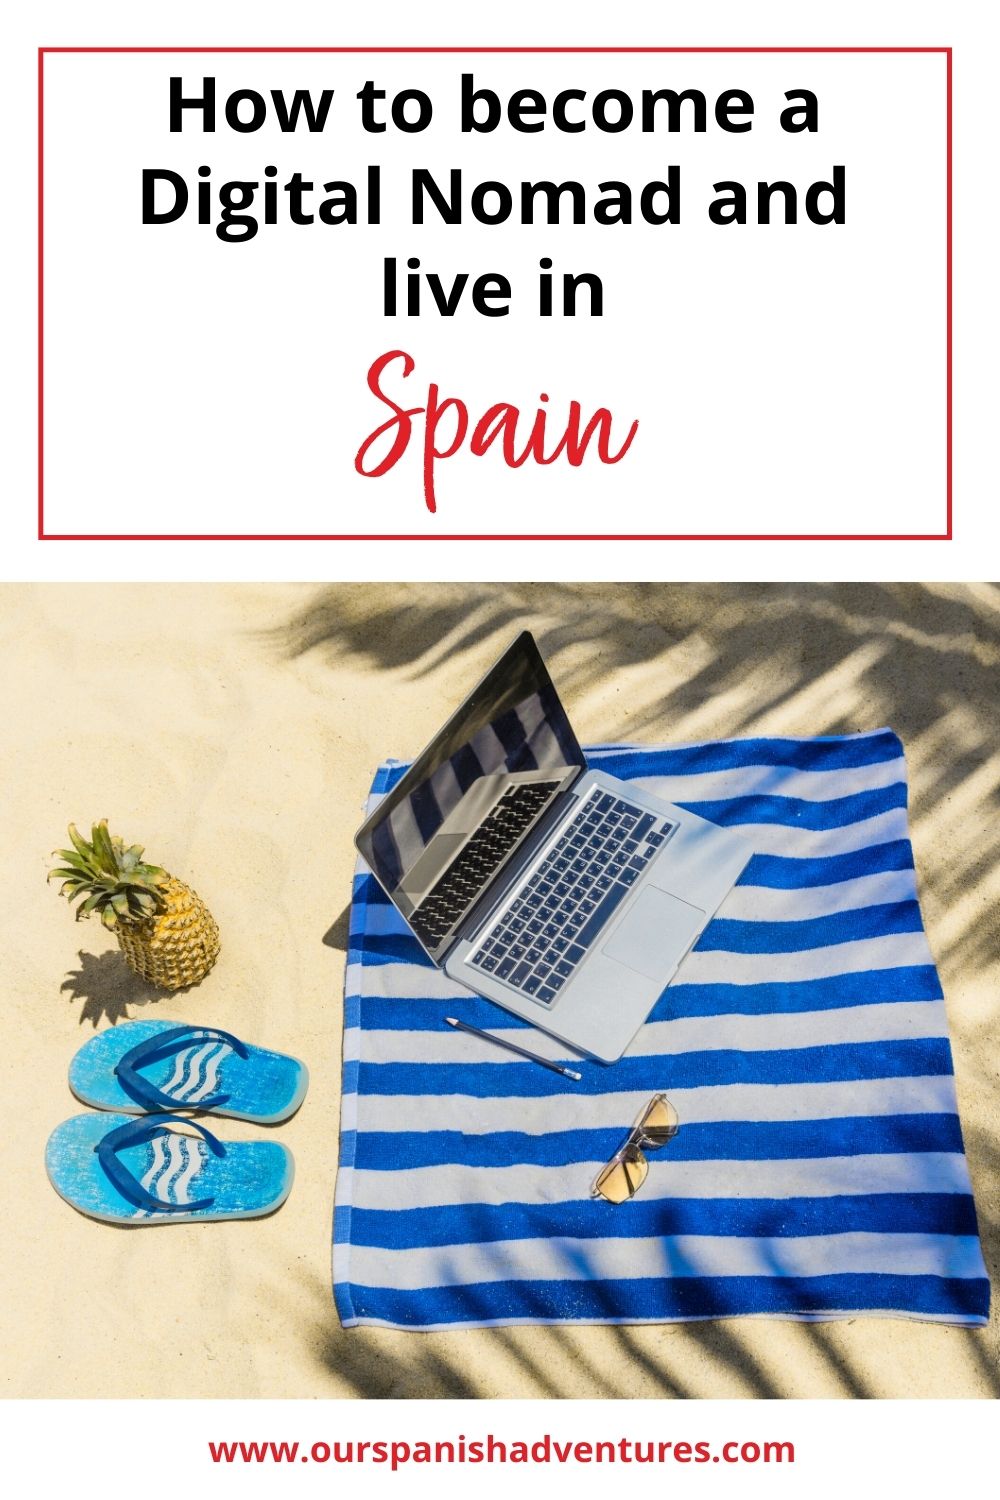 How to become a Digital Nomad and live in Spain | Our Spanish Adventures